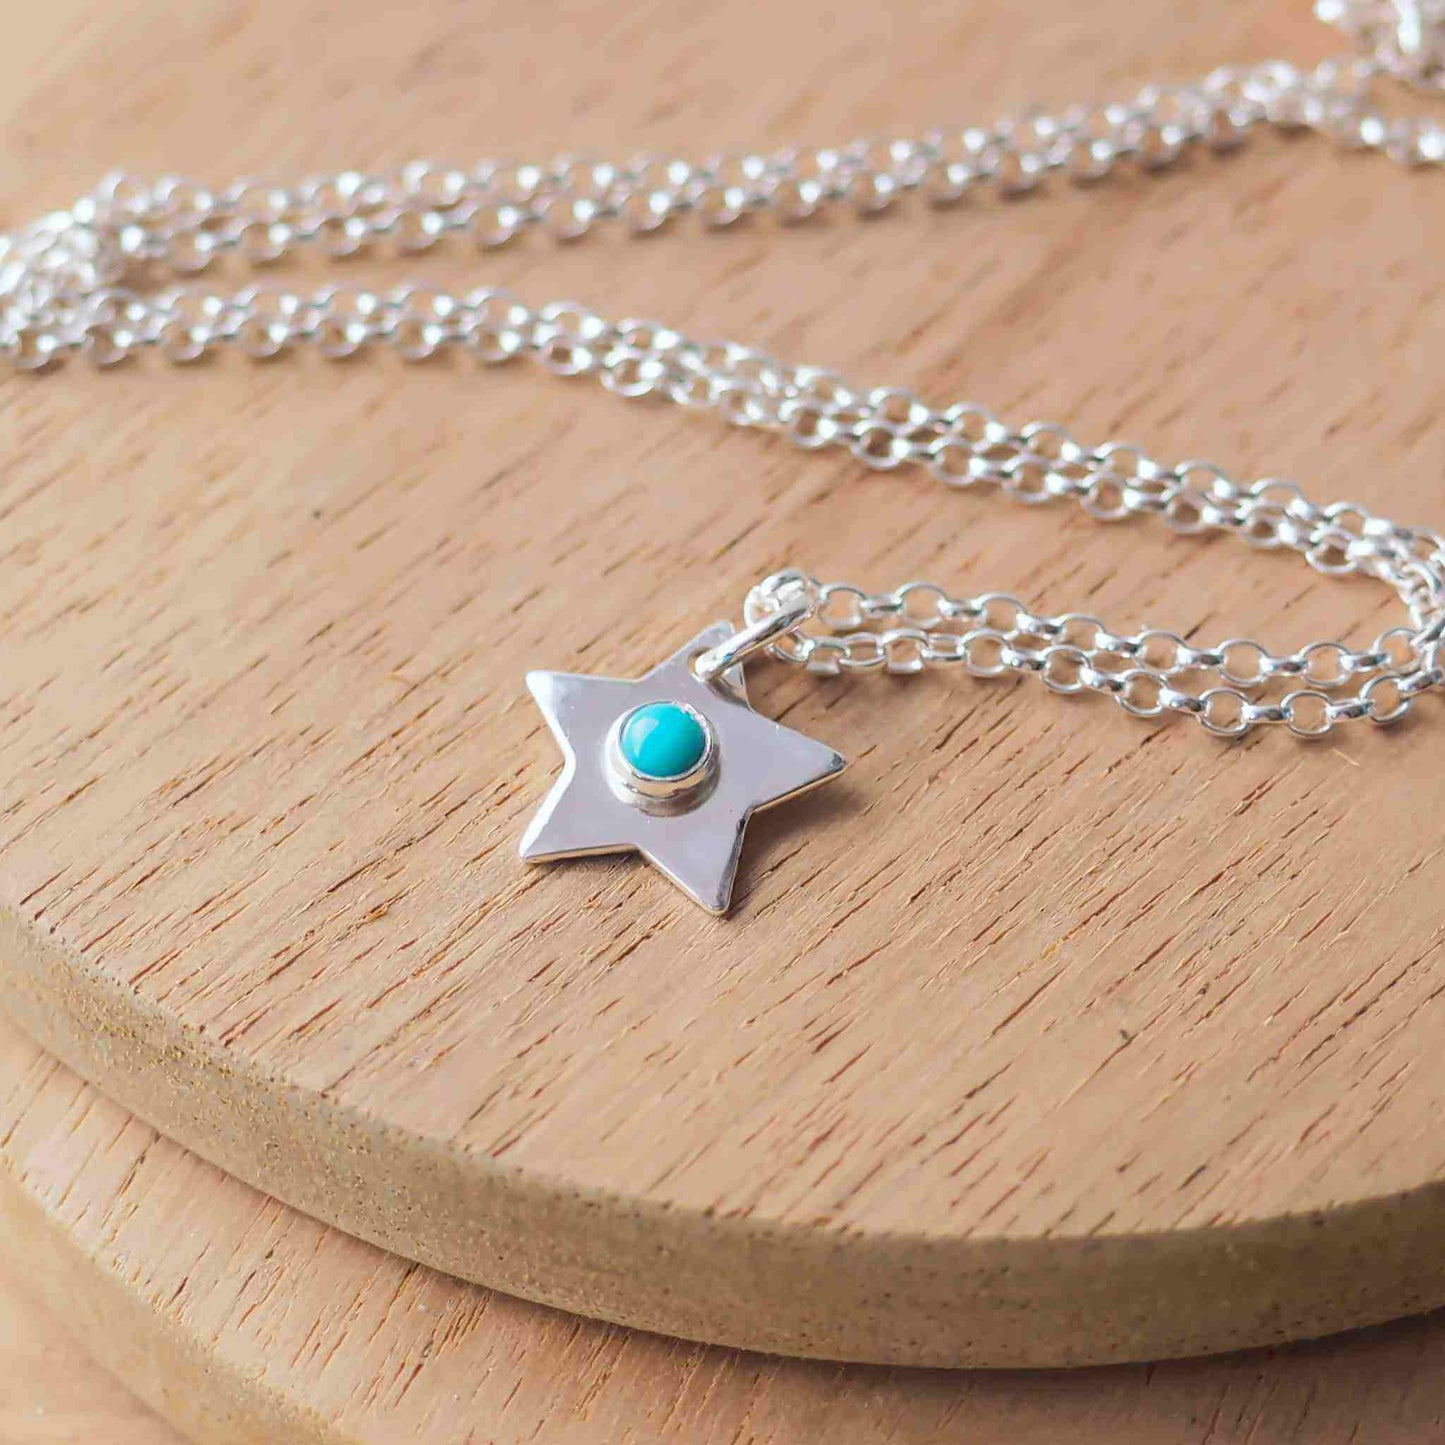 December Birthstone Charm Necklace in the shape of a star with a round 3mm Turquoise cabochon centre. The star measures 12mm in size so is small enough for children as well as adults and is available in a range of other birthstones too. It is Sterling Silver and comes with a choice of chain design and length. Handmade in Scotland by Maram Jewellery